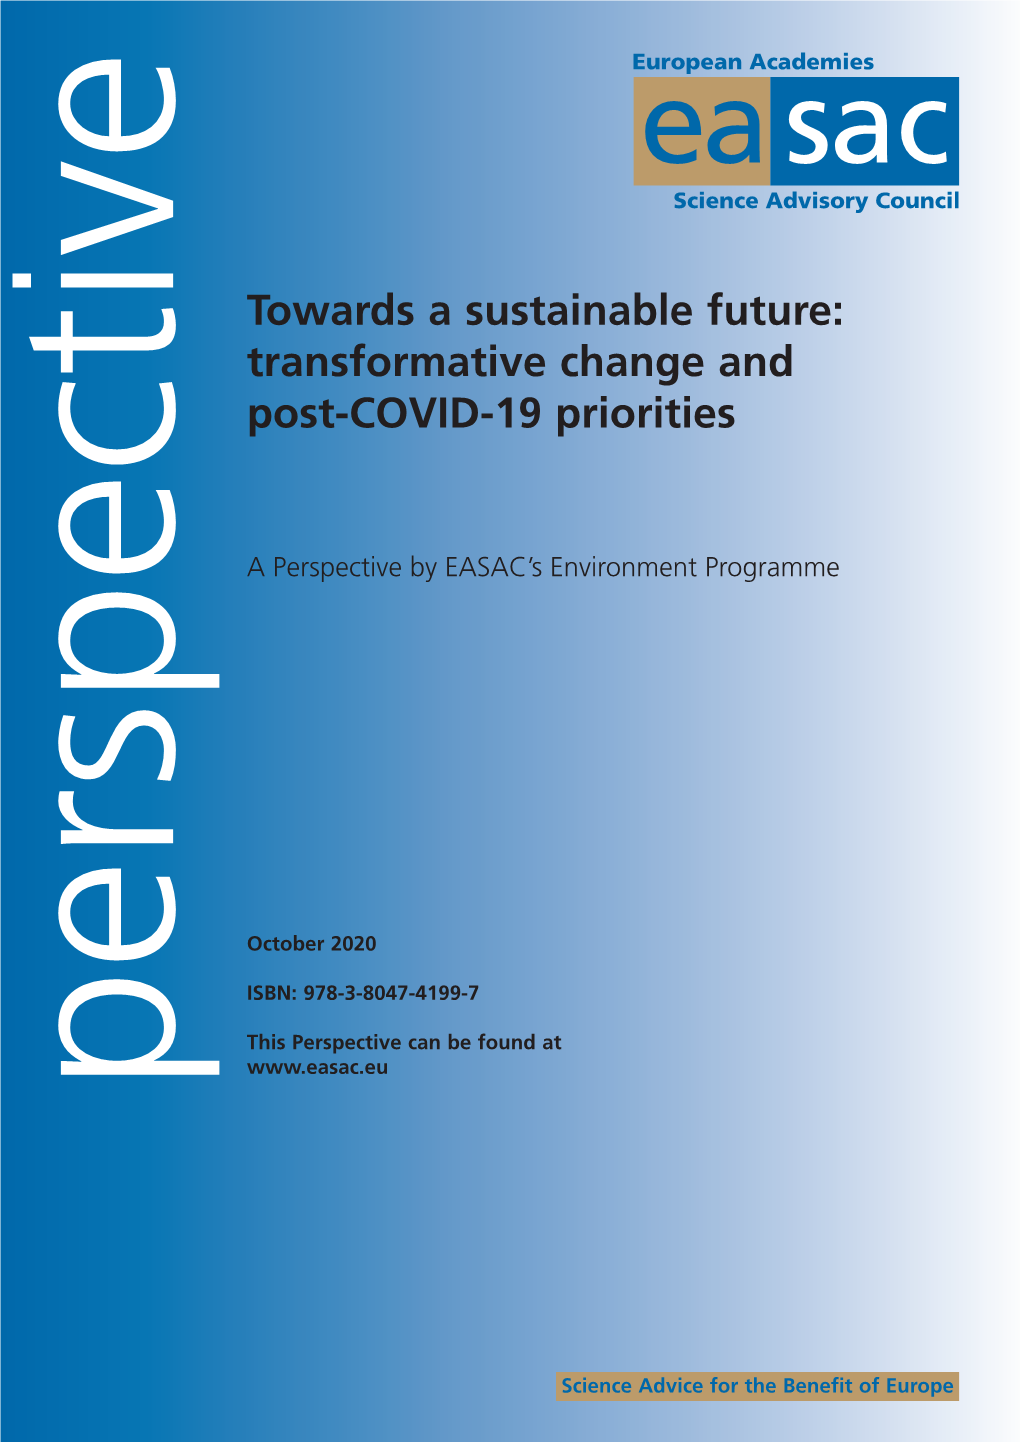 Towards a Sustainable Future: Transformative Change and Post-COVID-19 Priorities